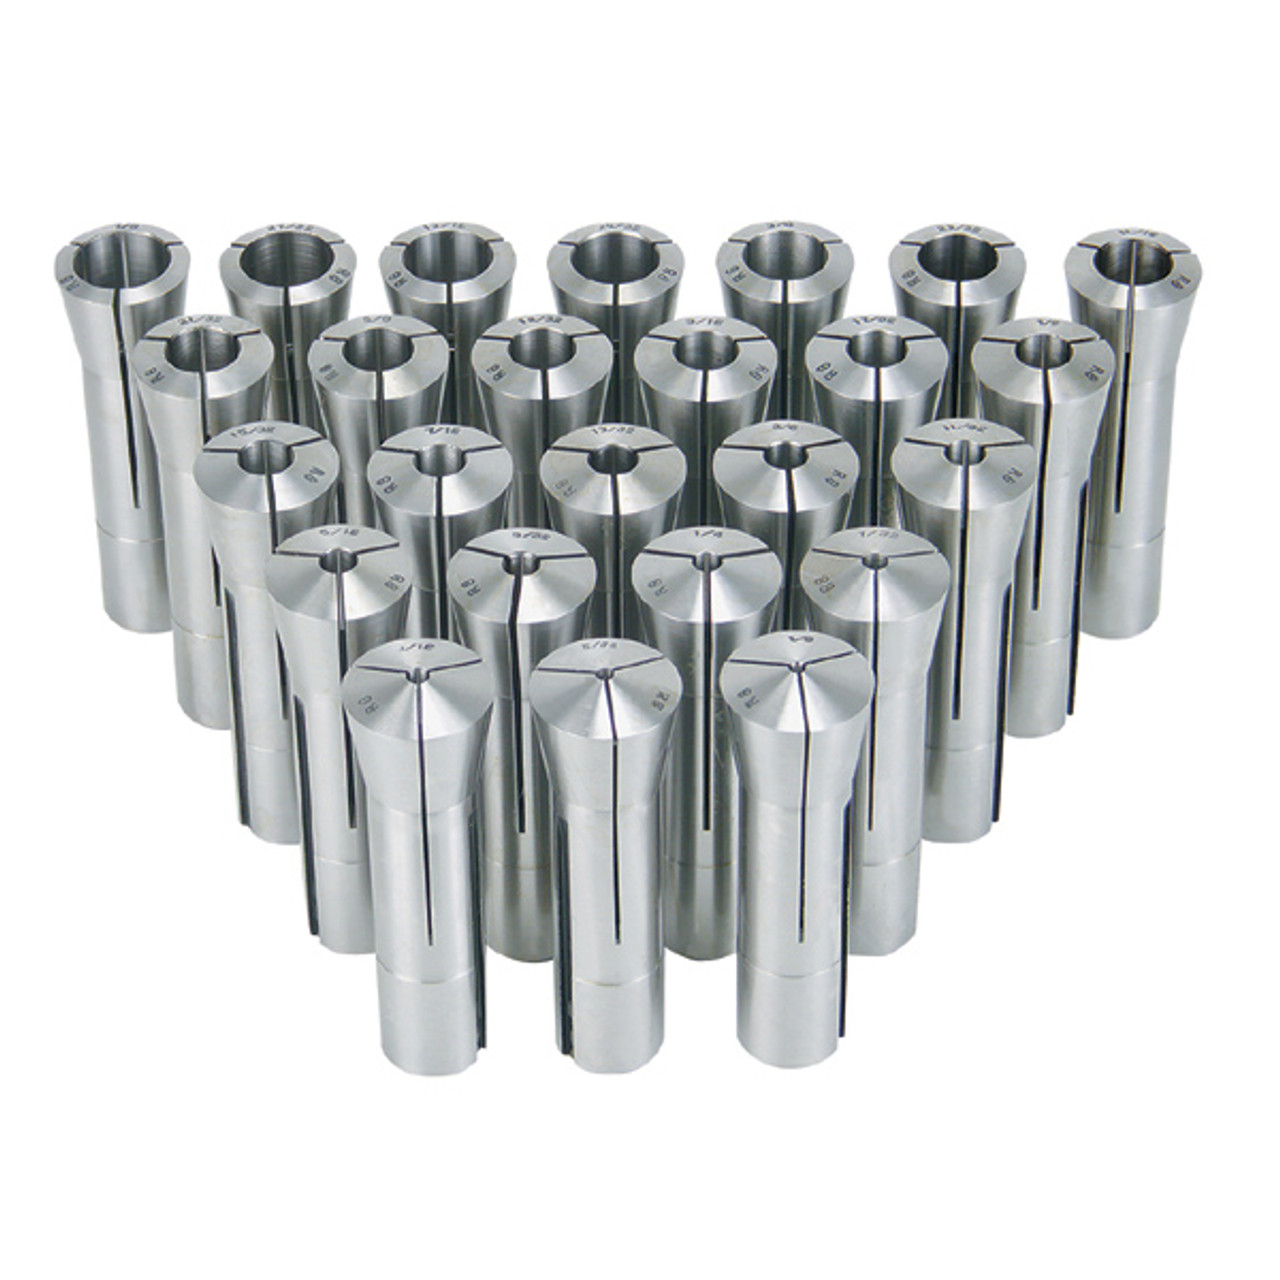 69-510-065      1/8" - 7/8" BY 32NDSCOLLET SET